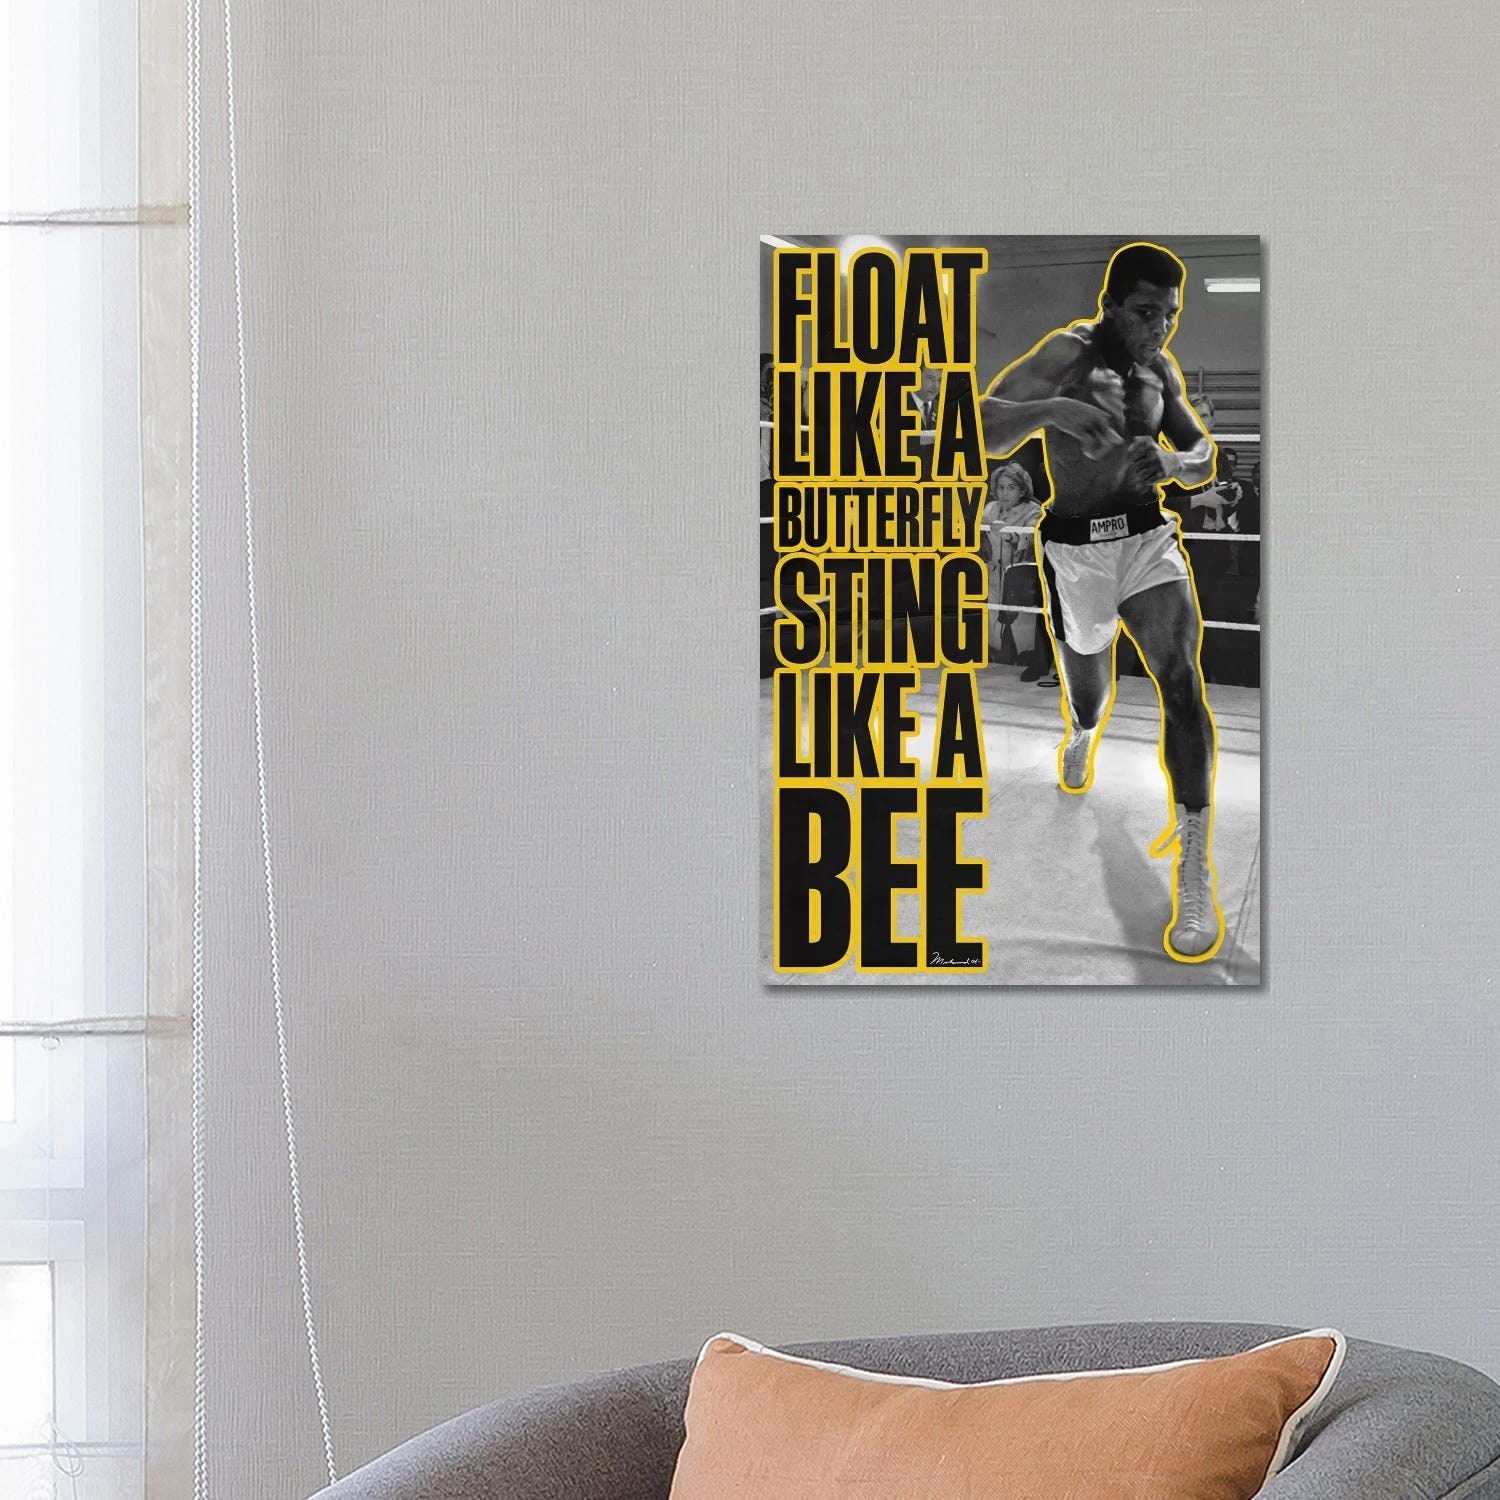 Icanvas Float Like A Butterfly Sting Like A Bee By Muhammad Ali Enterprises Canvas Print Overstock